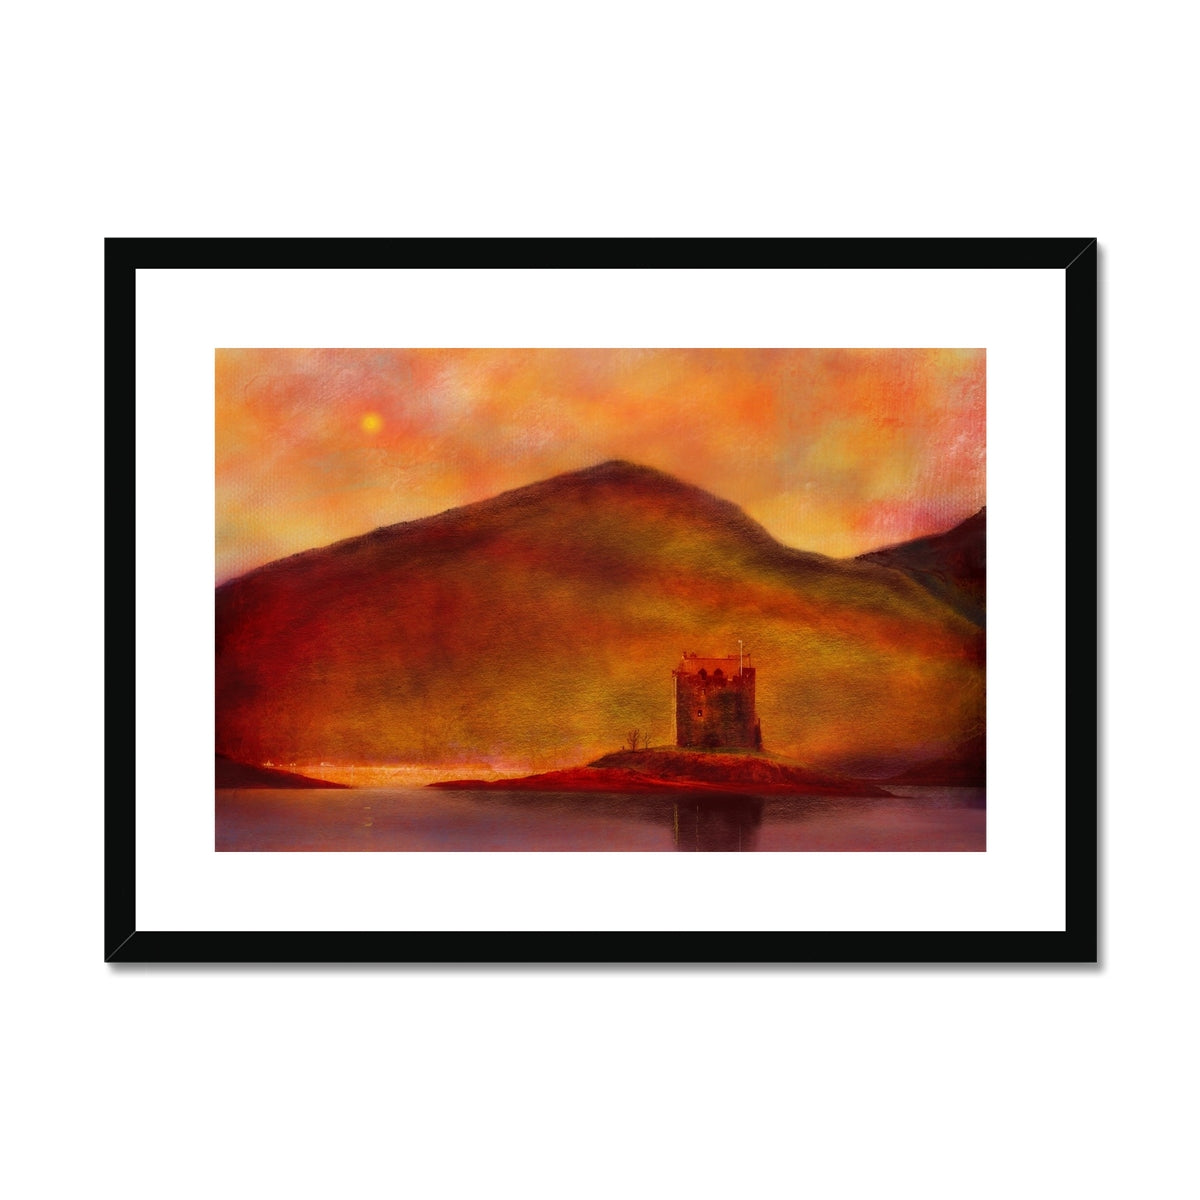 Castle Stalker Sunset Painting | Framed & Mounted Prints From Scotland-Framed & Mounted Prints-Historic & Iconic Scotland Art Gallery-A2 Landscape-Black Frame-Paintings, Prints, Homeware, Art Gifts From Scotland By Scottish Artist Kevin Hunter